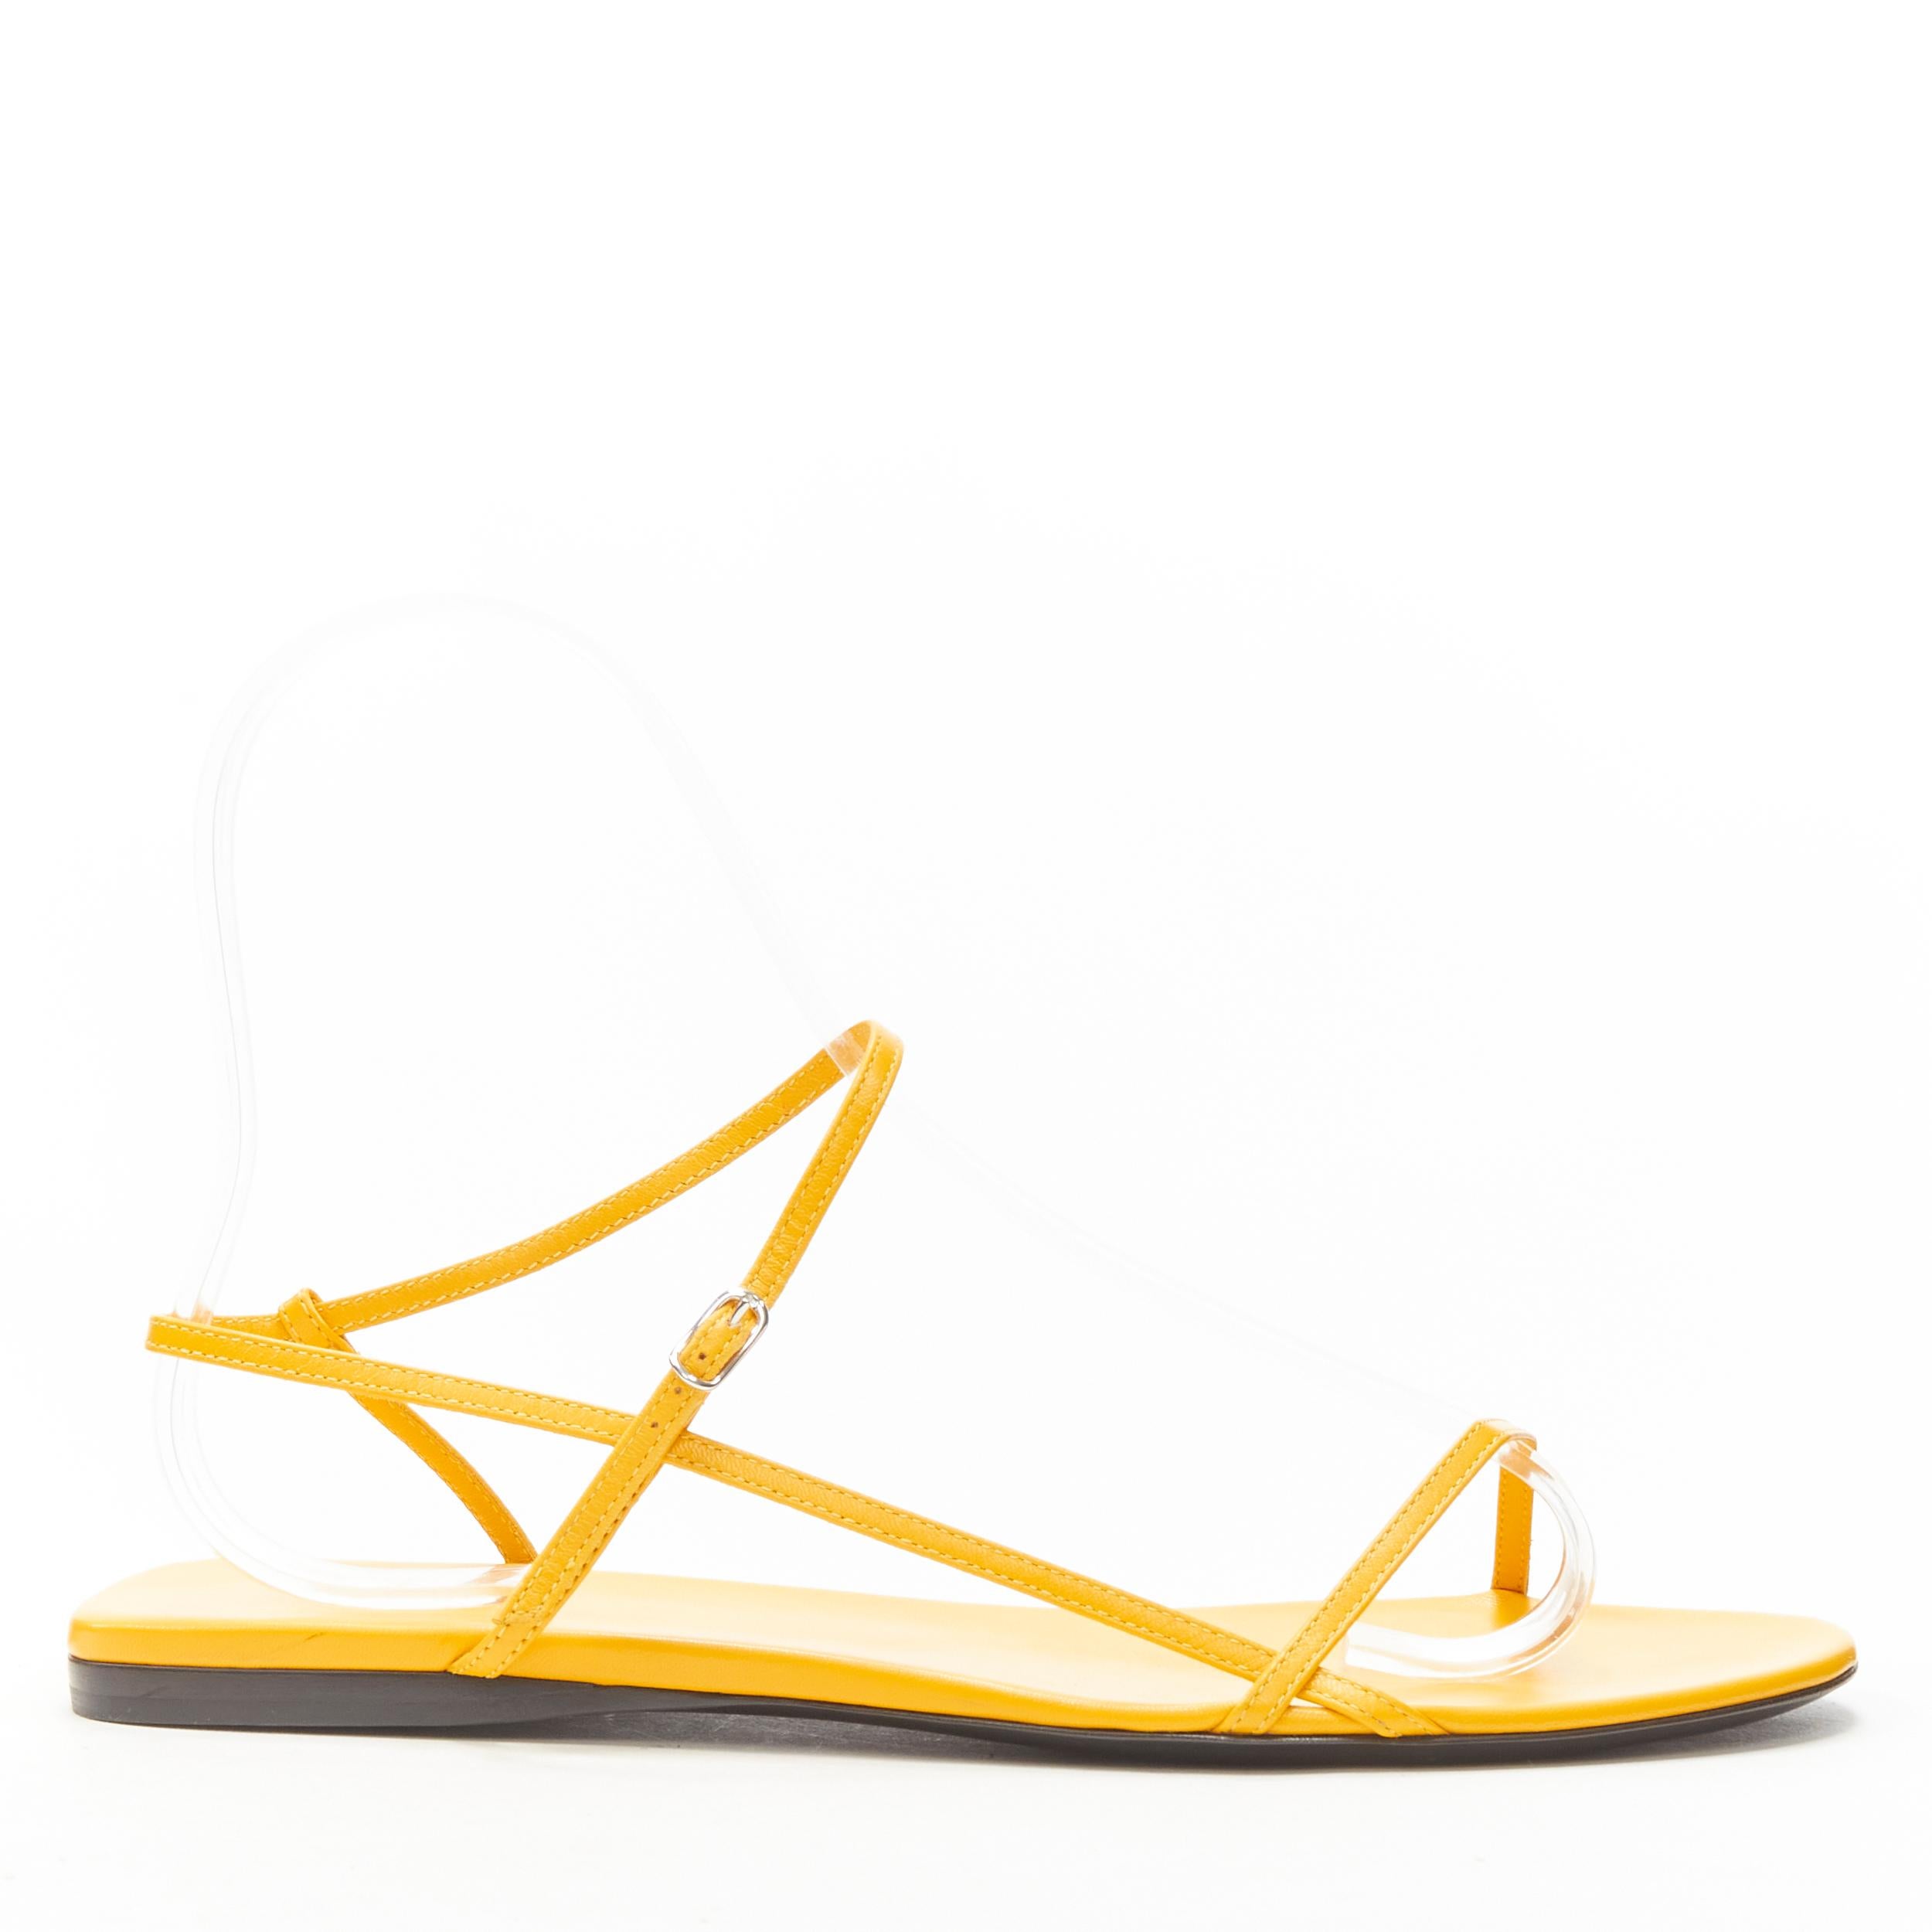 new THE ROW Bare Flat Sandal  mustard yellow kid leather minimal slides EU38
Brand: The Row
Designer: Mary Kate and Ashley Olsen
Model: Flat Bare Sandal
Material: Leather
Color: Yellow
Pattern: Solid
Closure: Ankle Strap
Extra Detail: Designer color